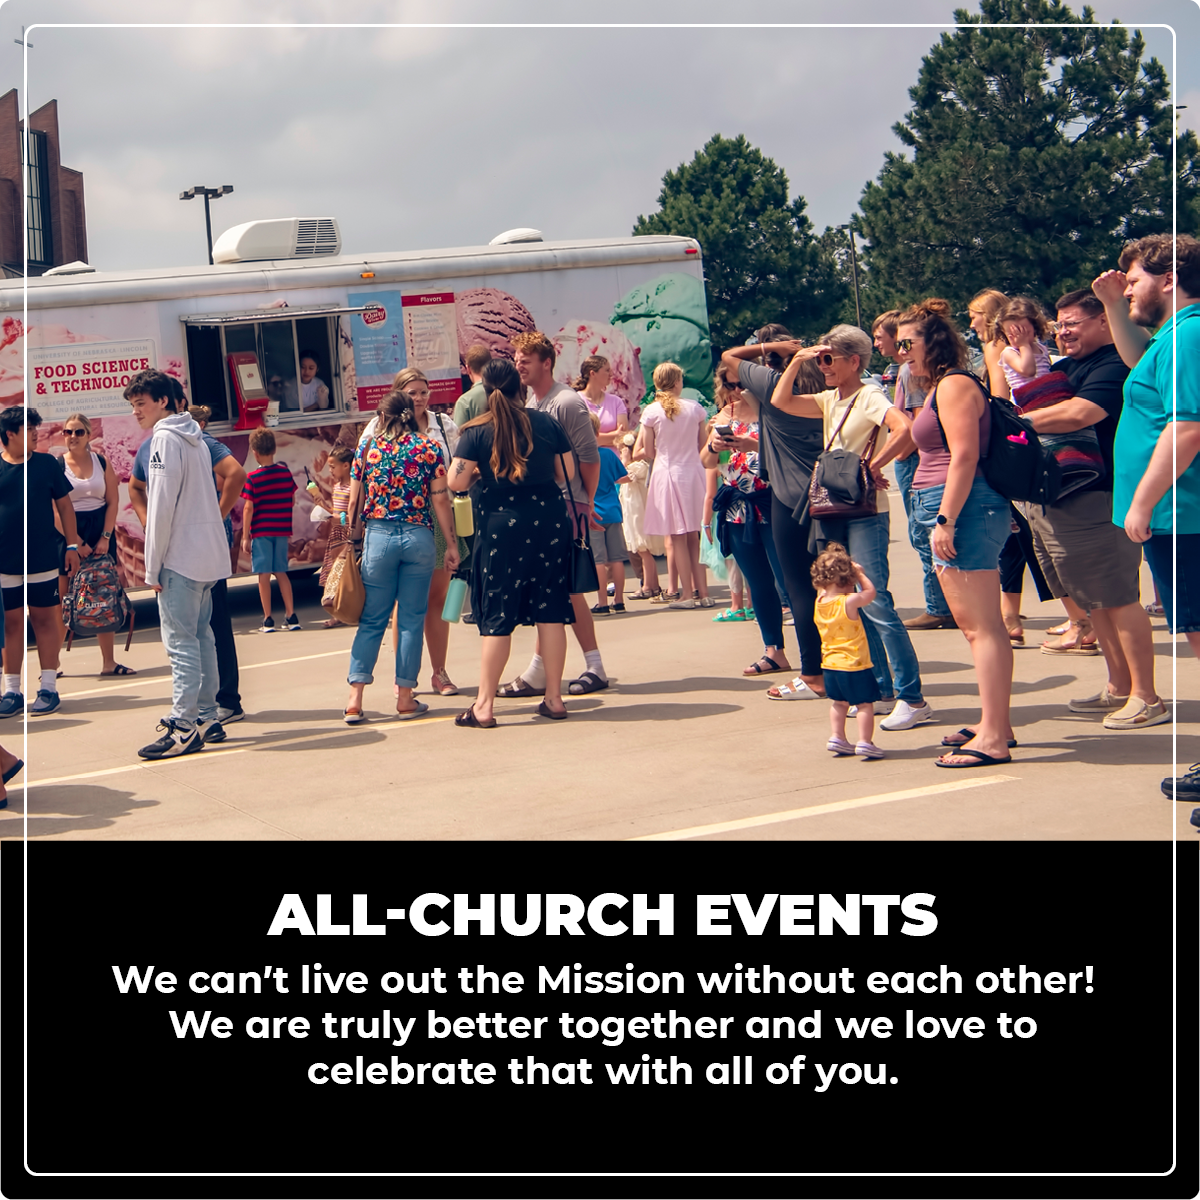 All-church events: We can’t live out the Mission without each other! We are truly better together and we love to celebrate that with all of you.